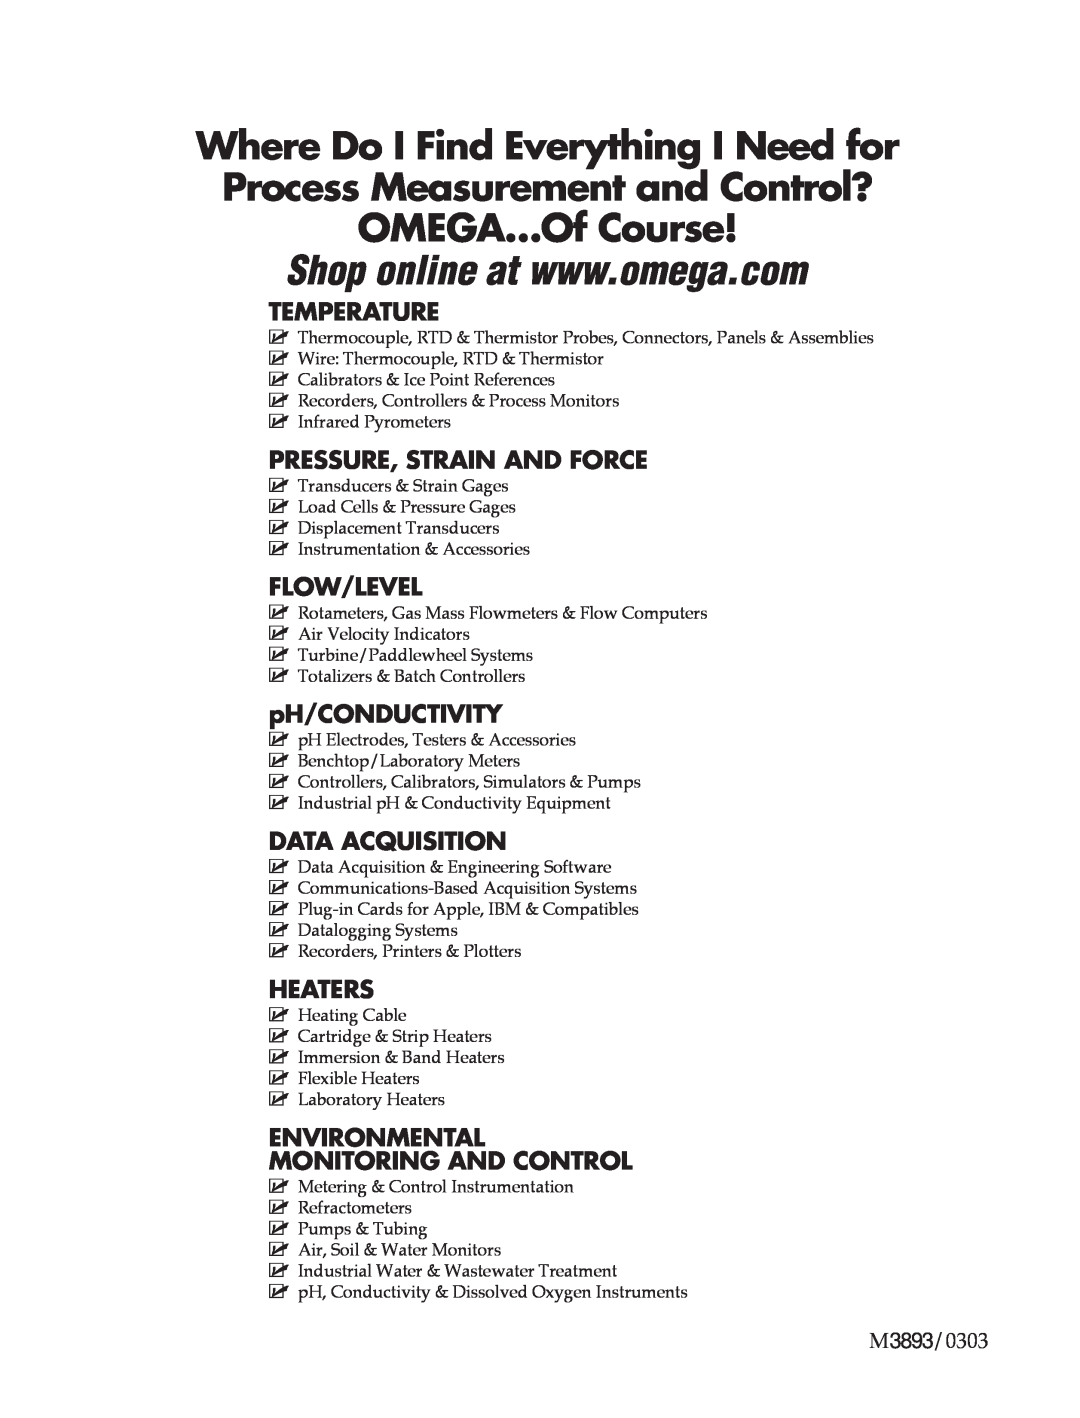 Omega RS-232 manual OMEGA…Of Course, Temperature, Pressure, Strain And Force, Flow/Level, pH/CONDUCTIVITY, Data Acquisition 